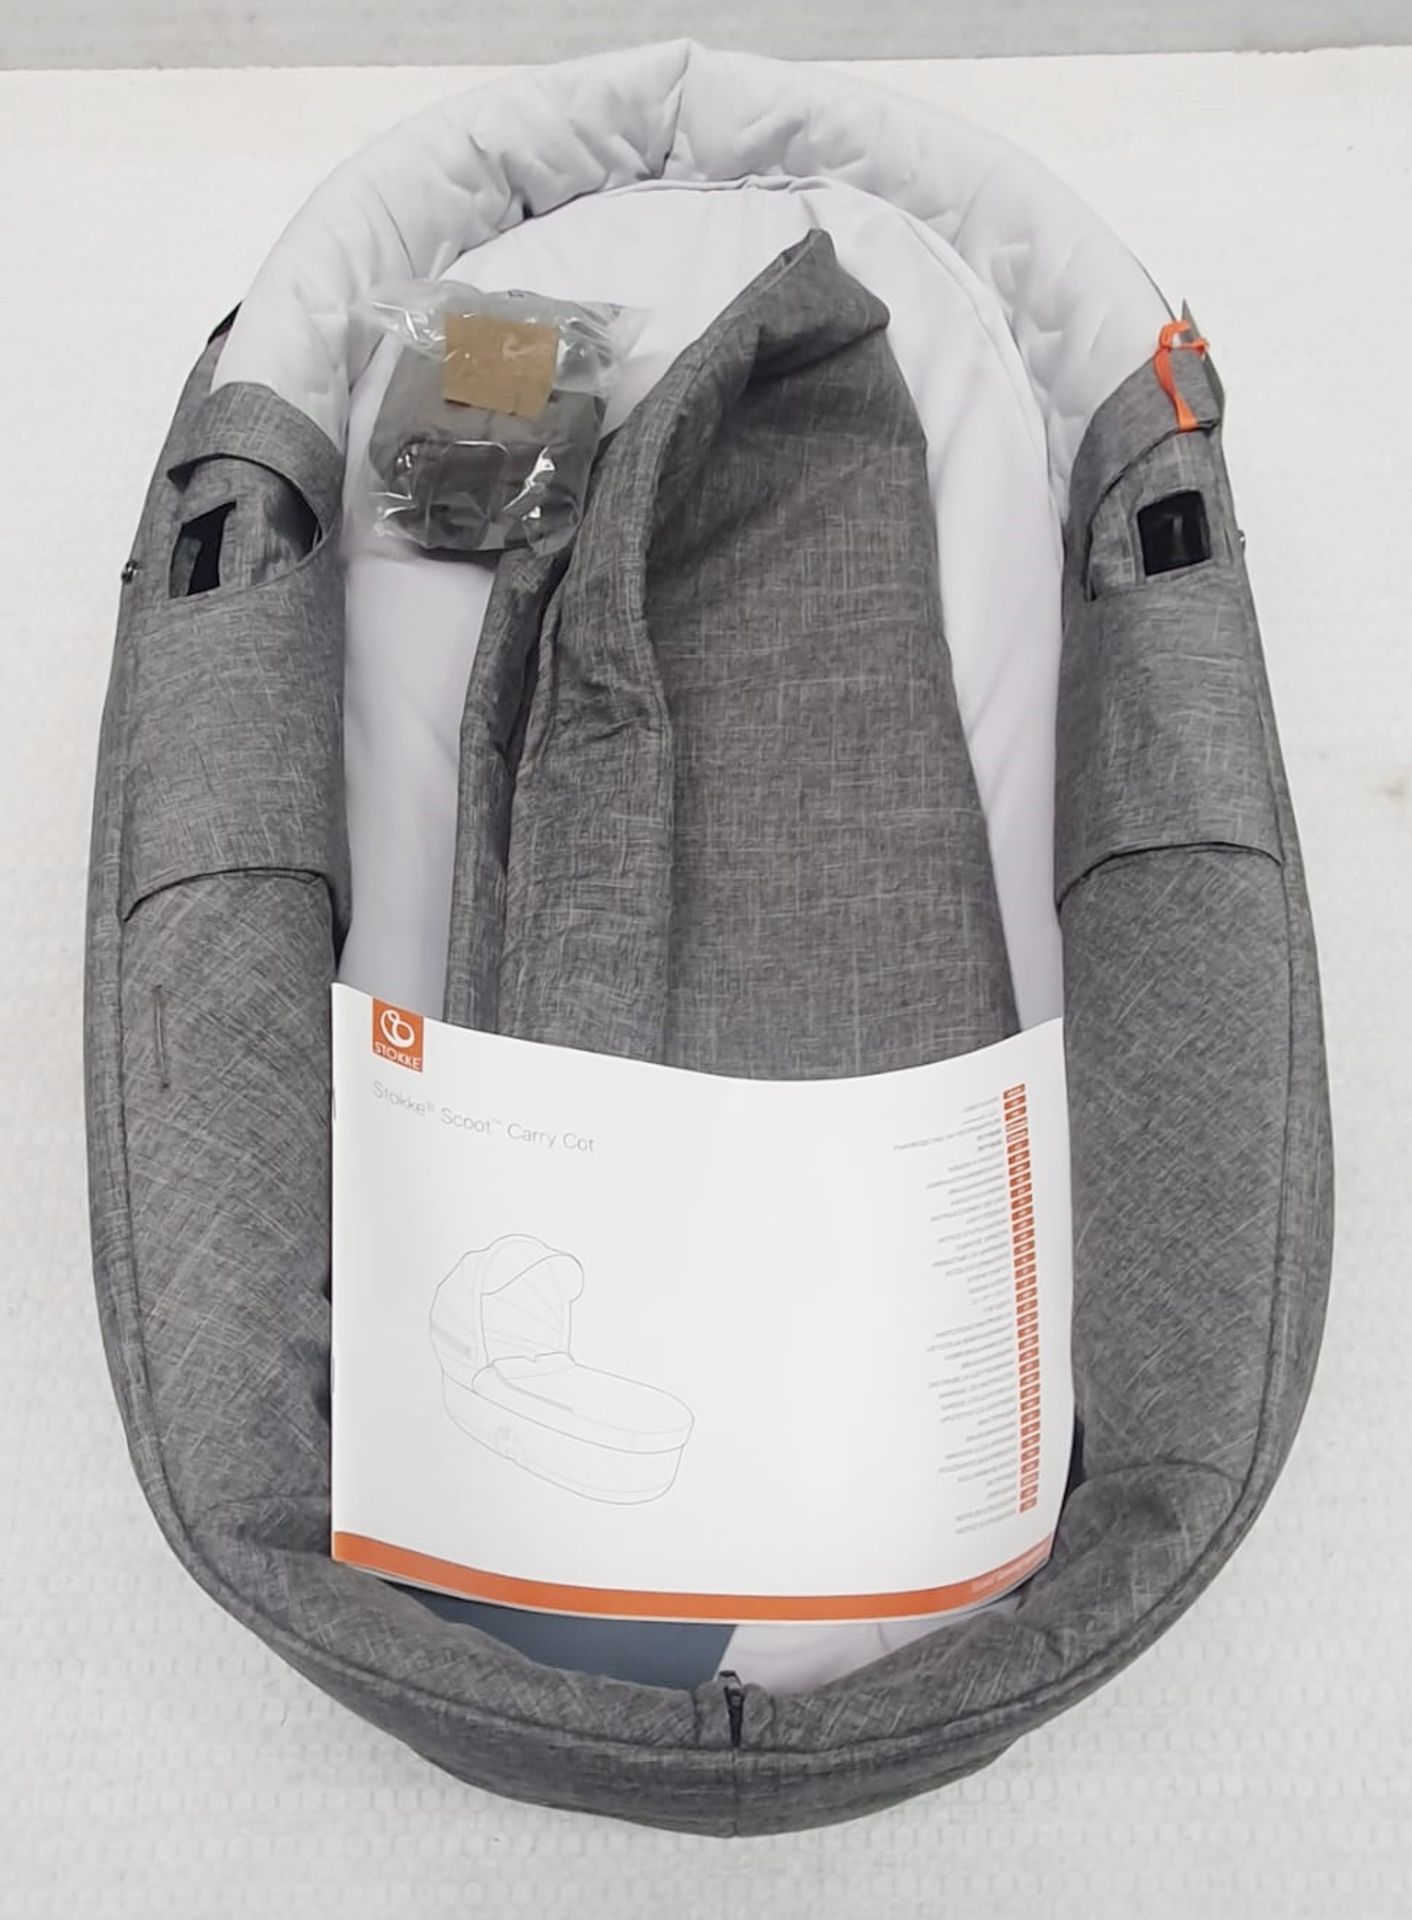 1 x STOKKE Beat Carry Cot - Original Price £199.99 - Unused Boxed Stock - Ref: HTY320 / WH2-SCT - - Image 8 of 9